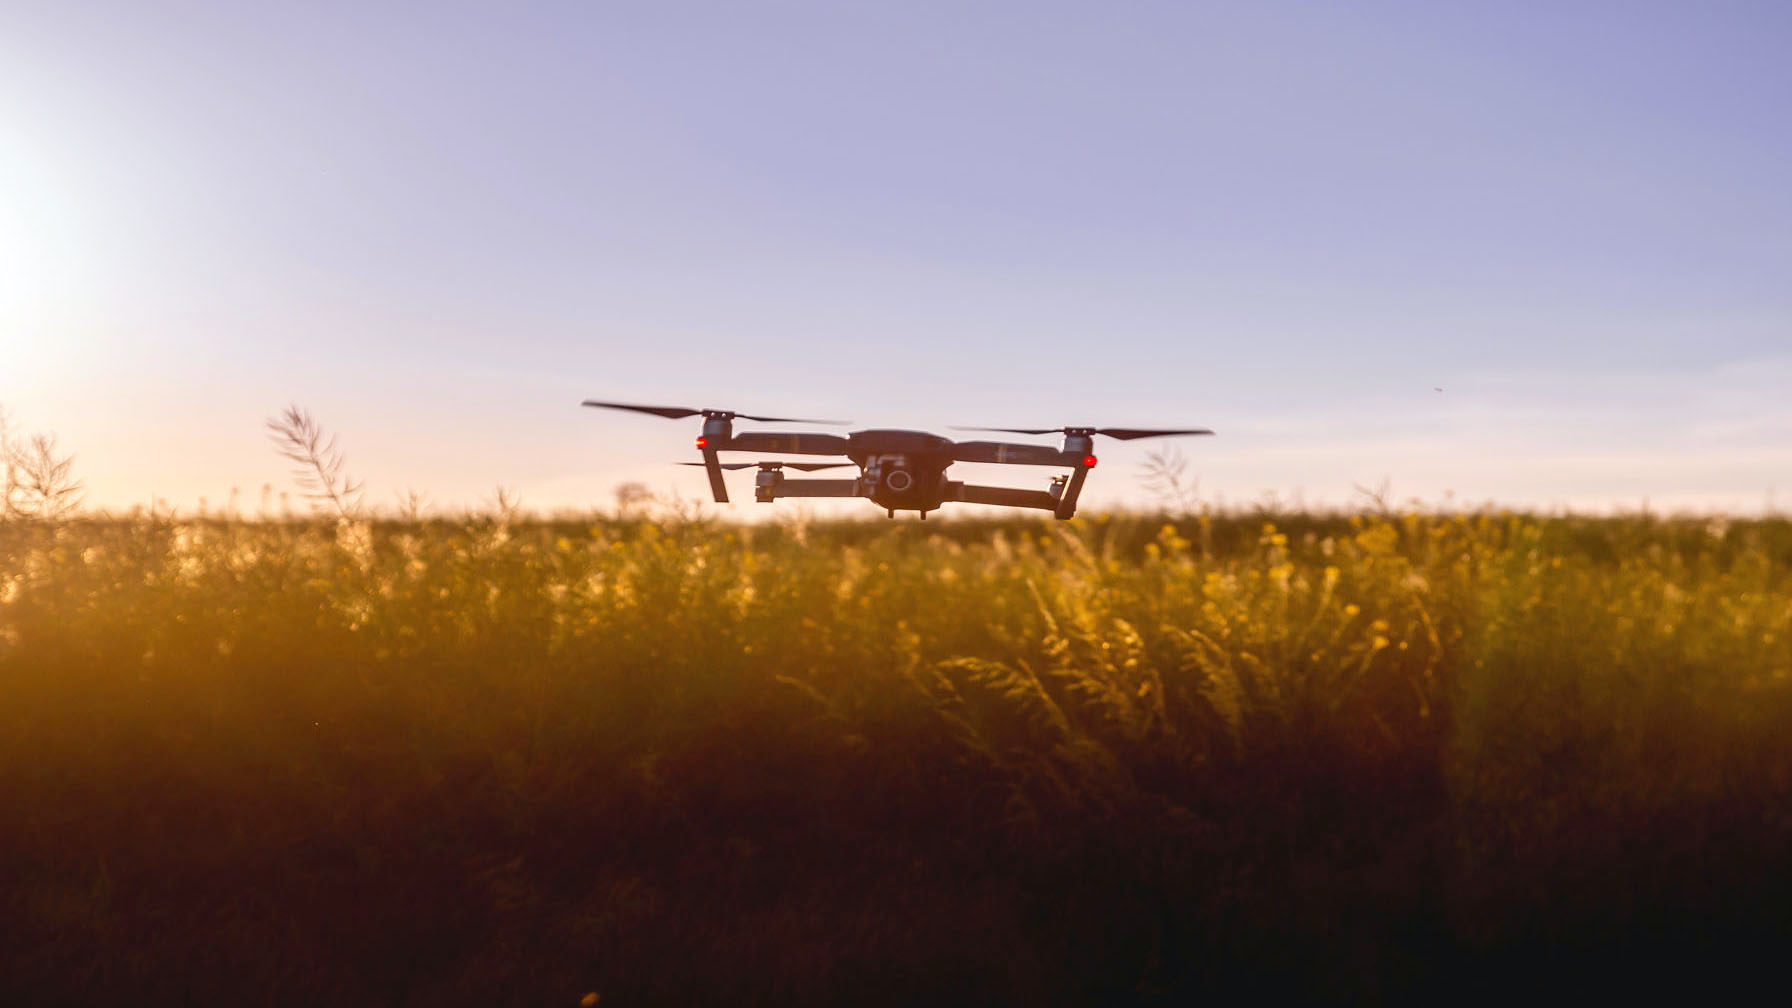 An agricultural drone flying over a field.